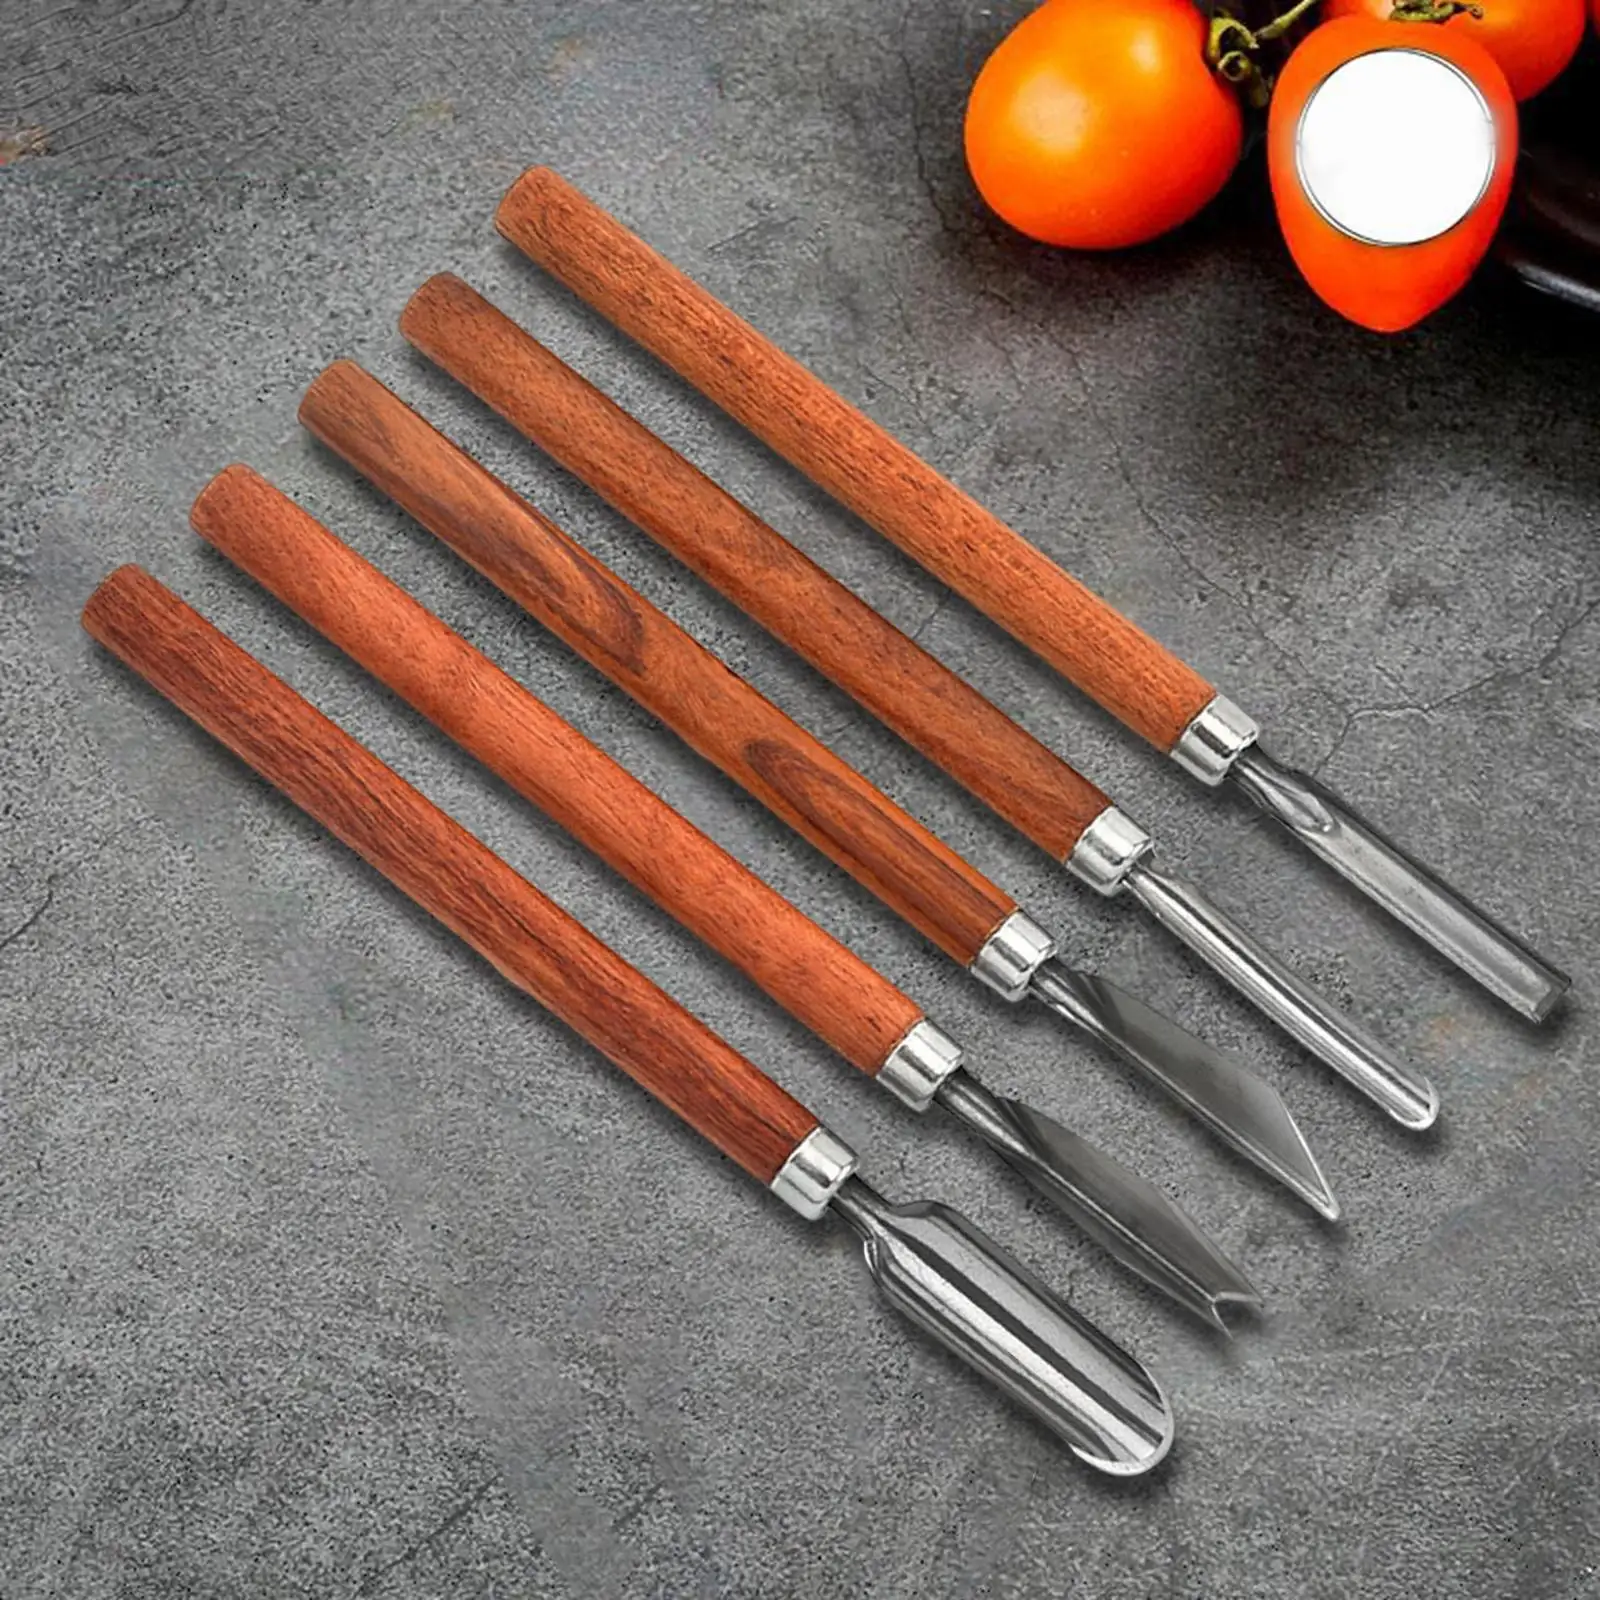 Portable Carving Knife Stainless Steel Vegetable Fruit Slicing Cutting Food Engraving Sculpting